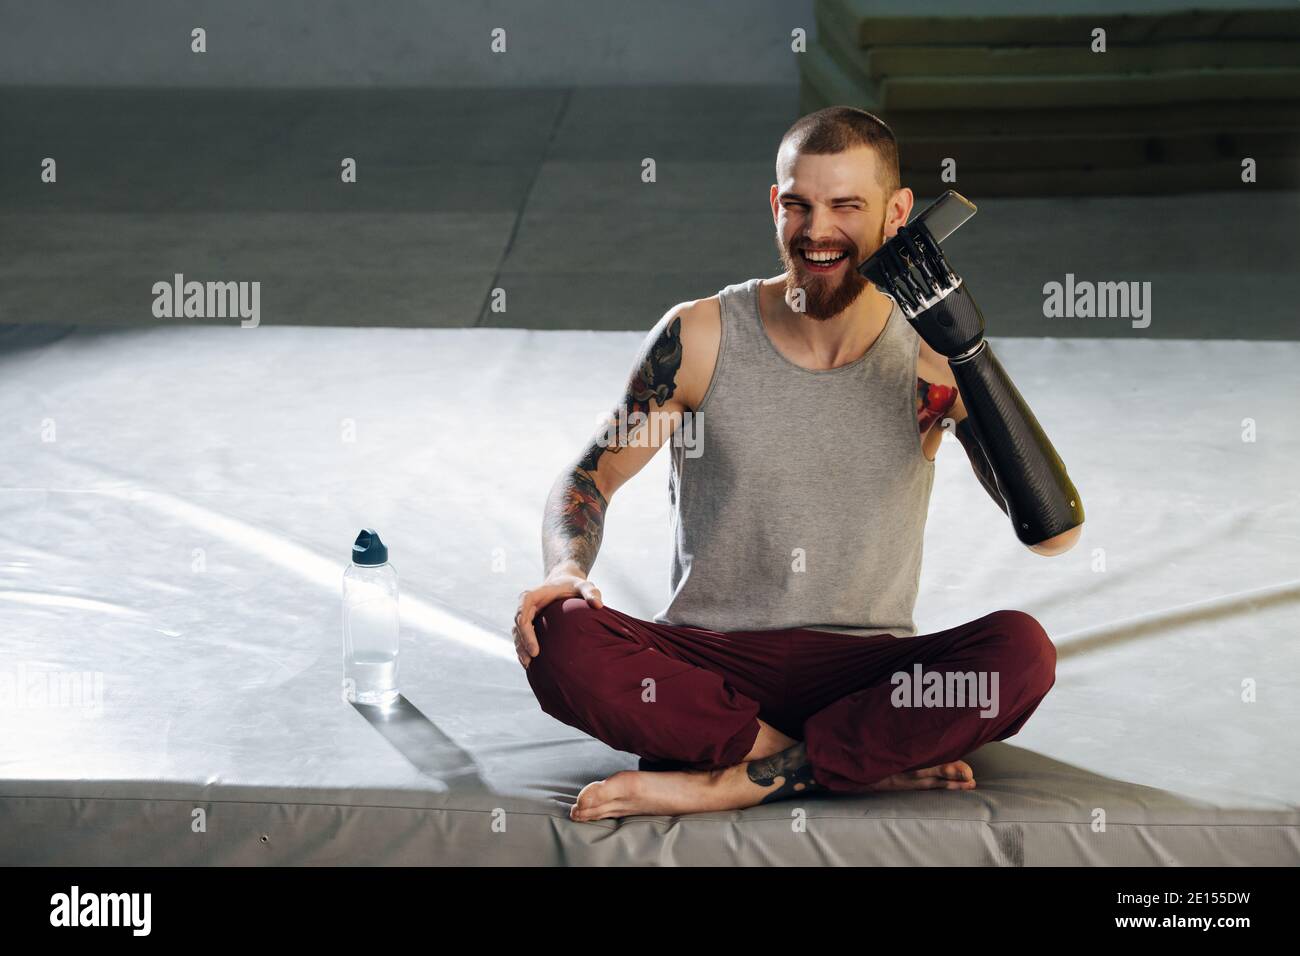 Funny cyborg man trying to hold his phone with bionic hand, laughing Stock Photo